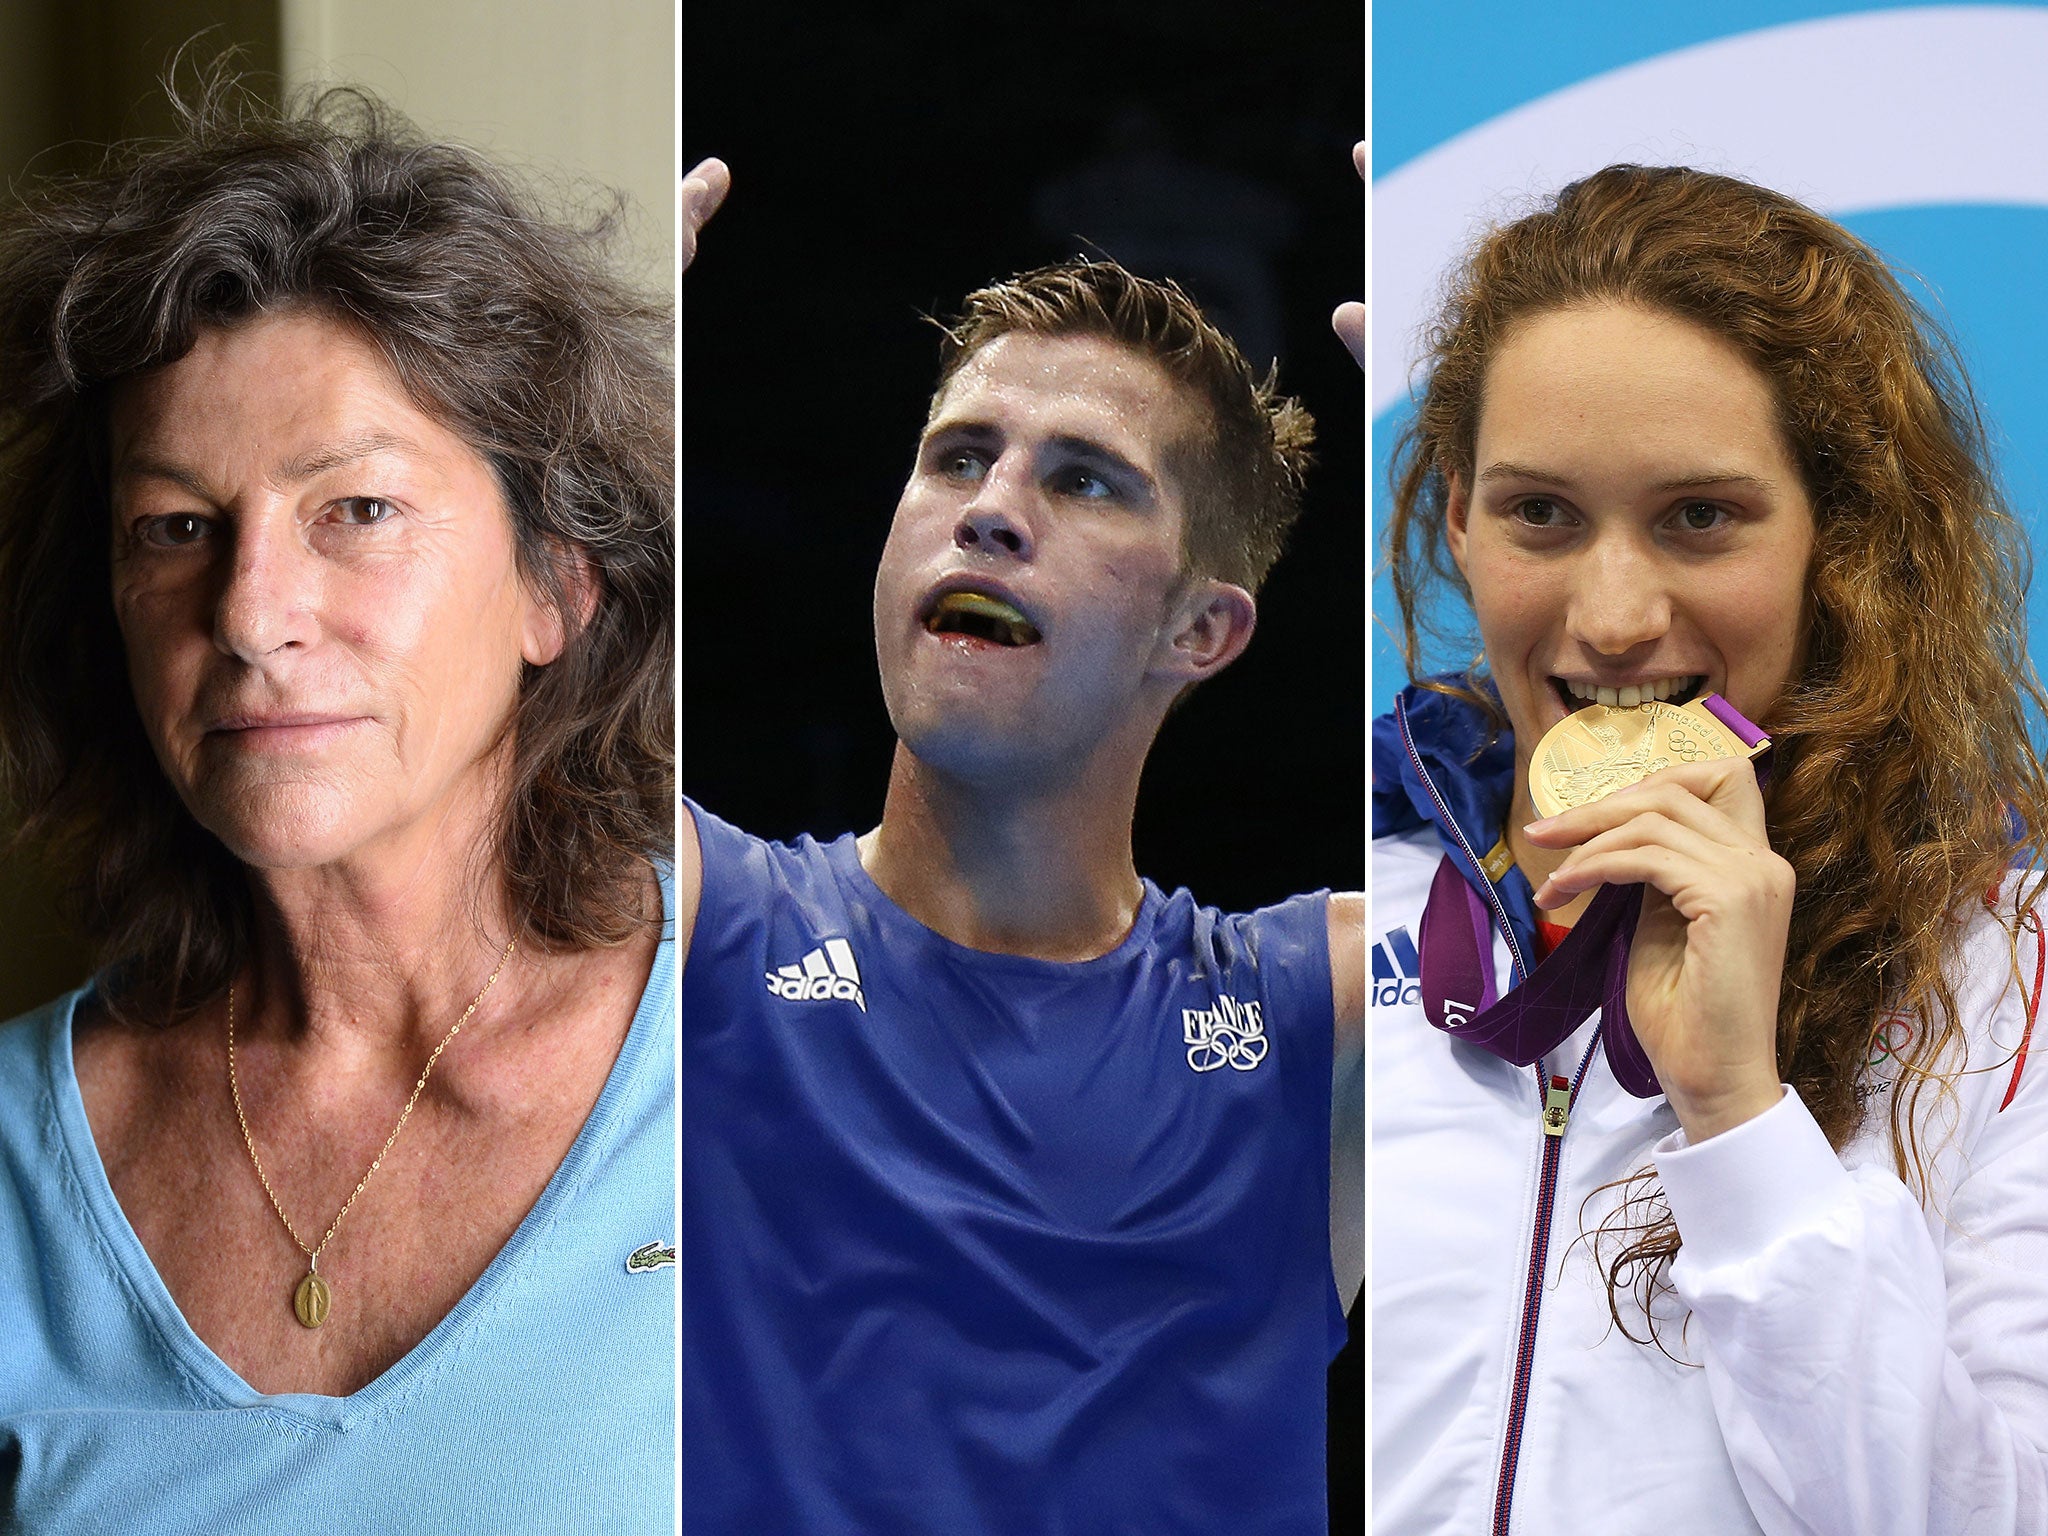 Florence Arthaud, Alexis Vastine and Camille Muffat have been killed in a helicopter crash